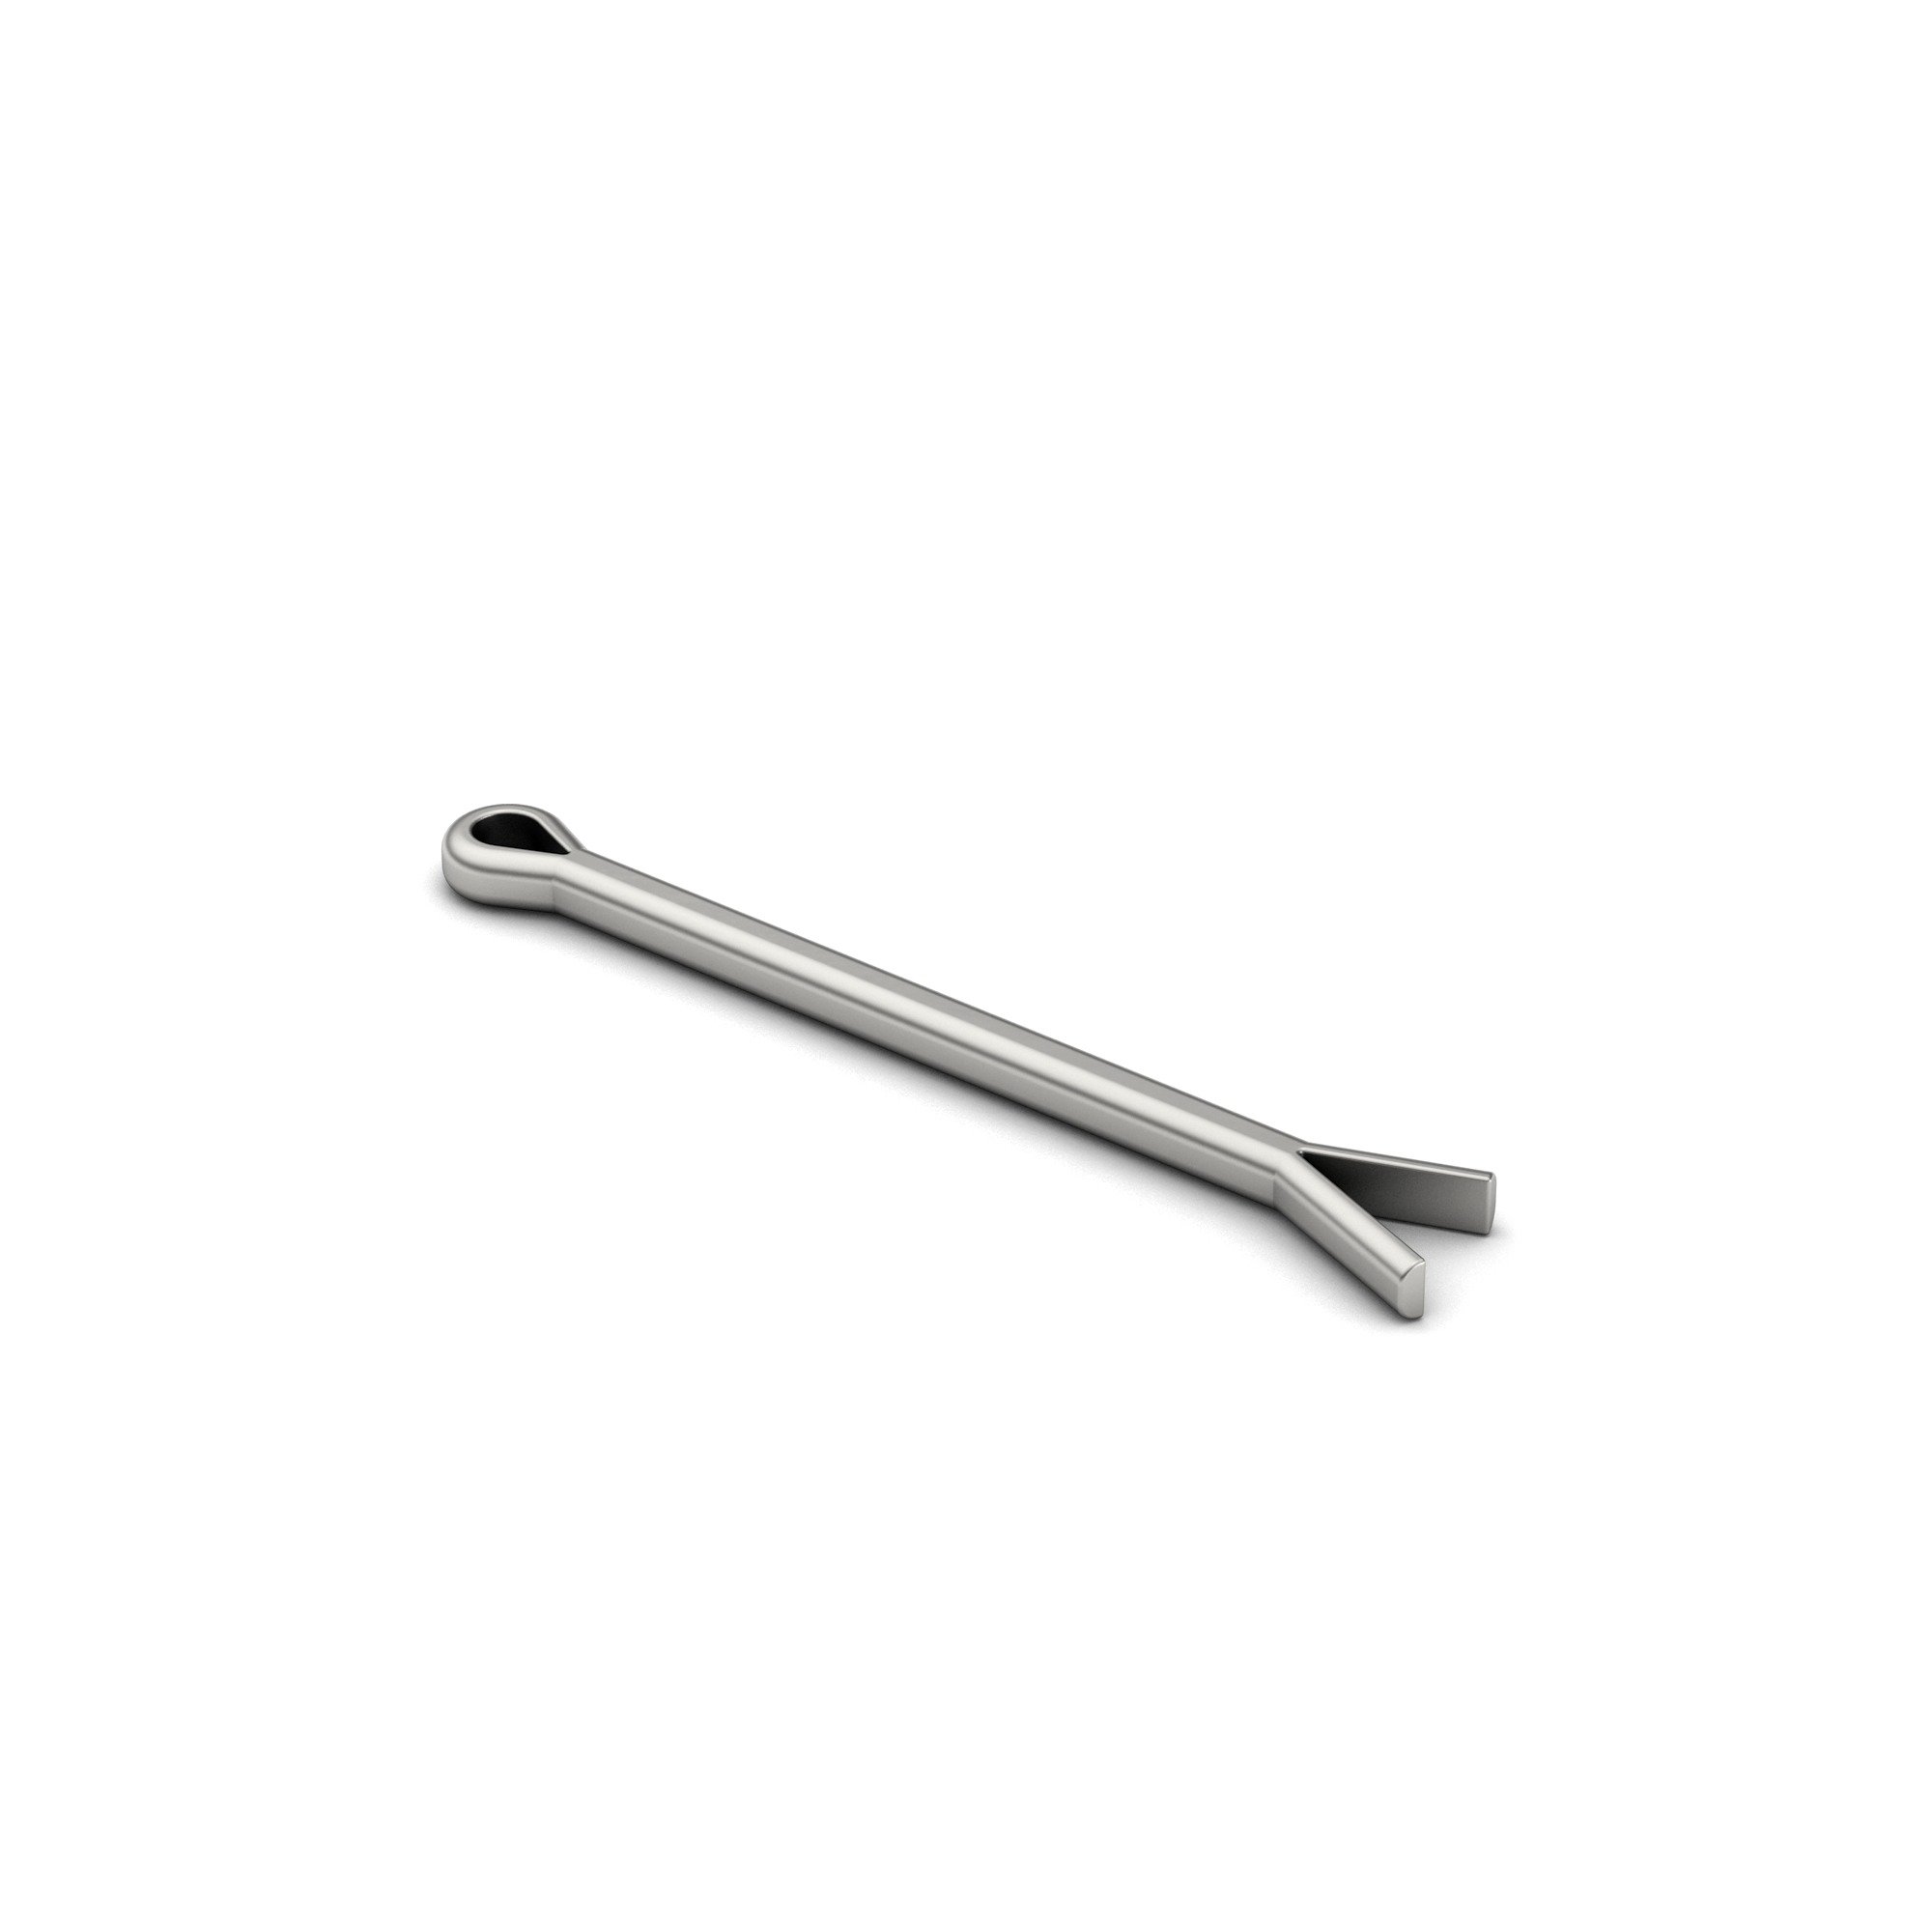 3/16x2 1/4 Carbon Steel Cotter Pin Extended Tip Plain Finish